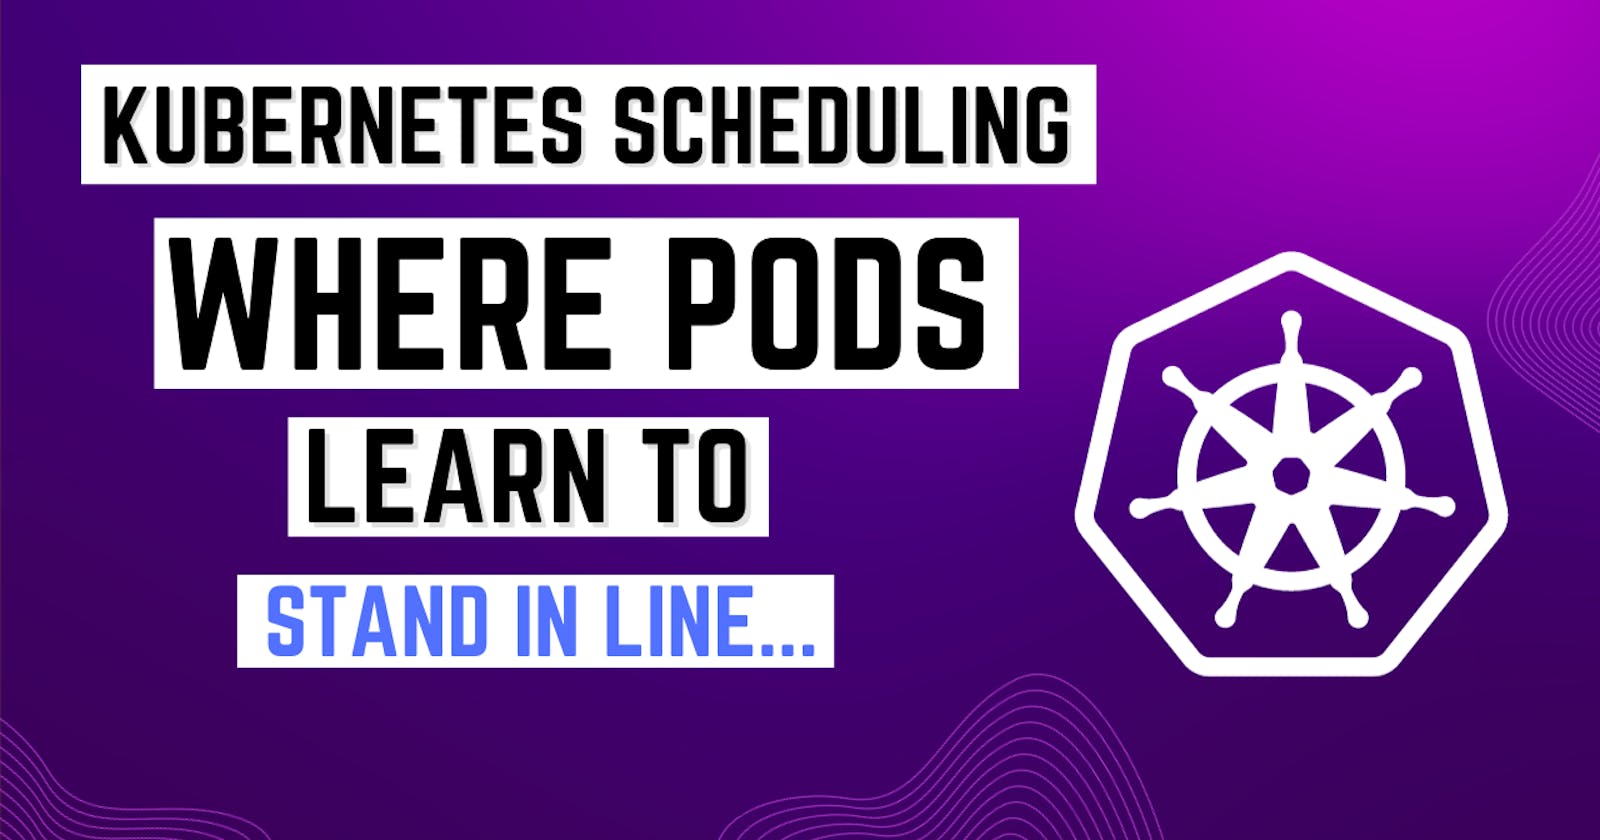 Kubernetes Scheduling: Where Pods Learn to Stand in Line (Or Not)